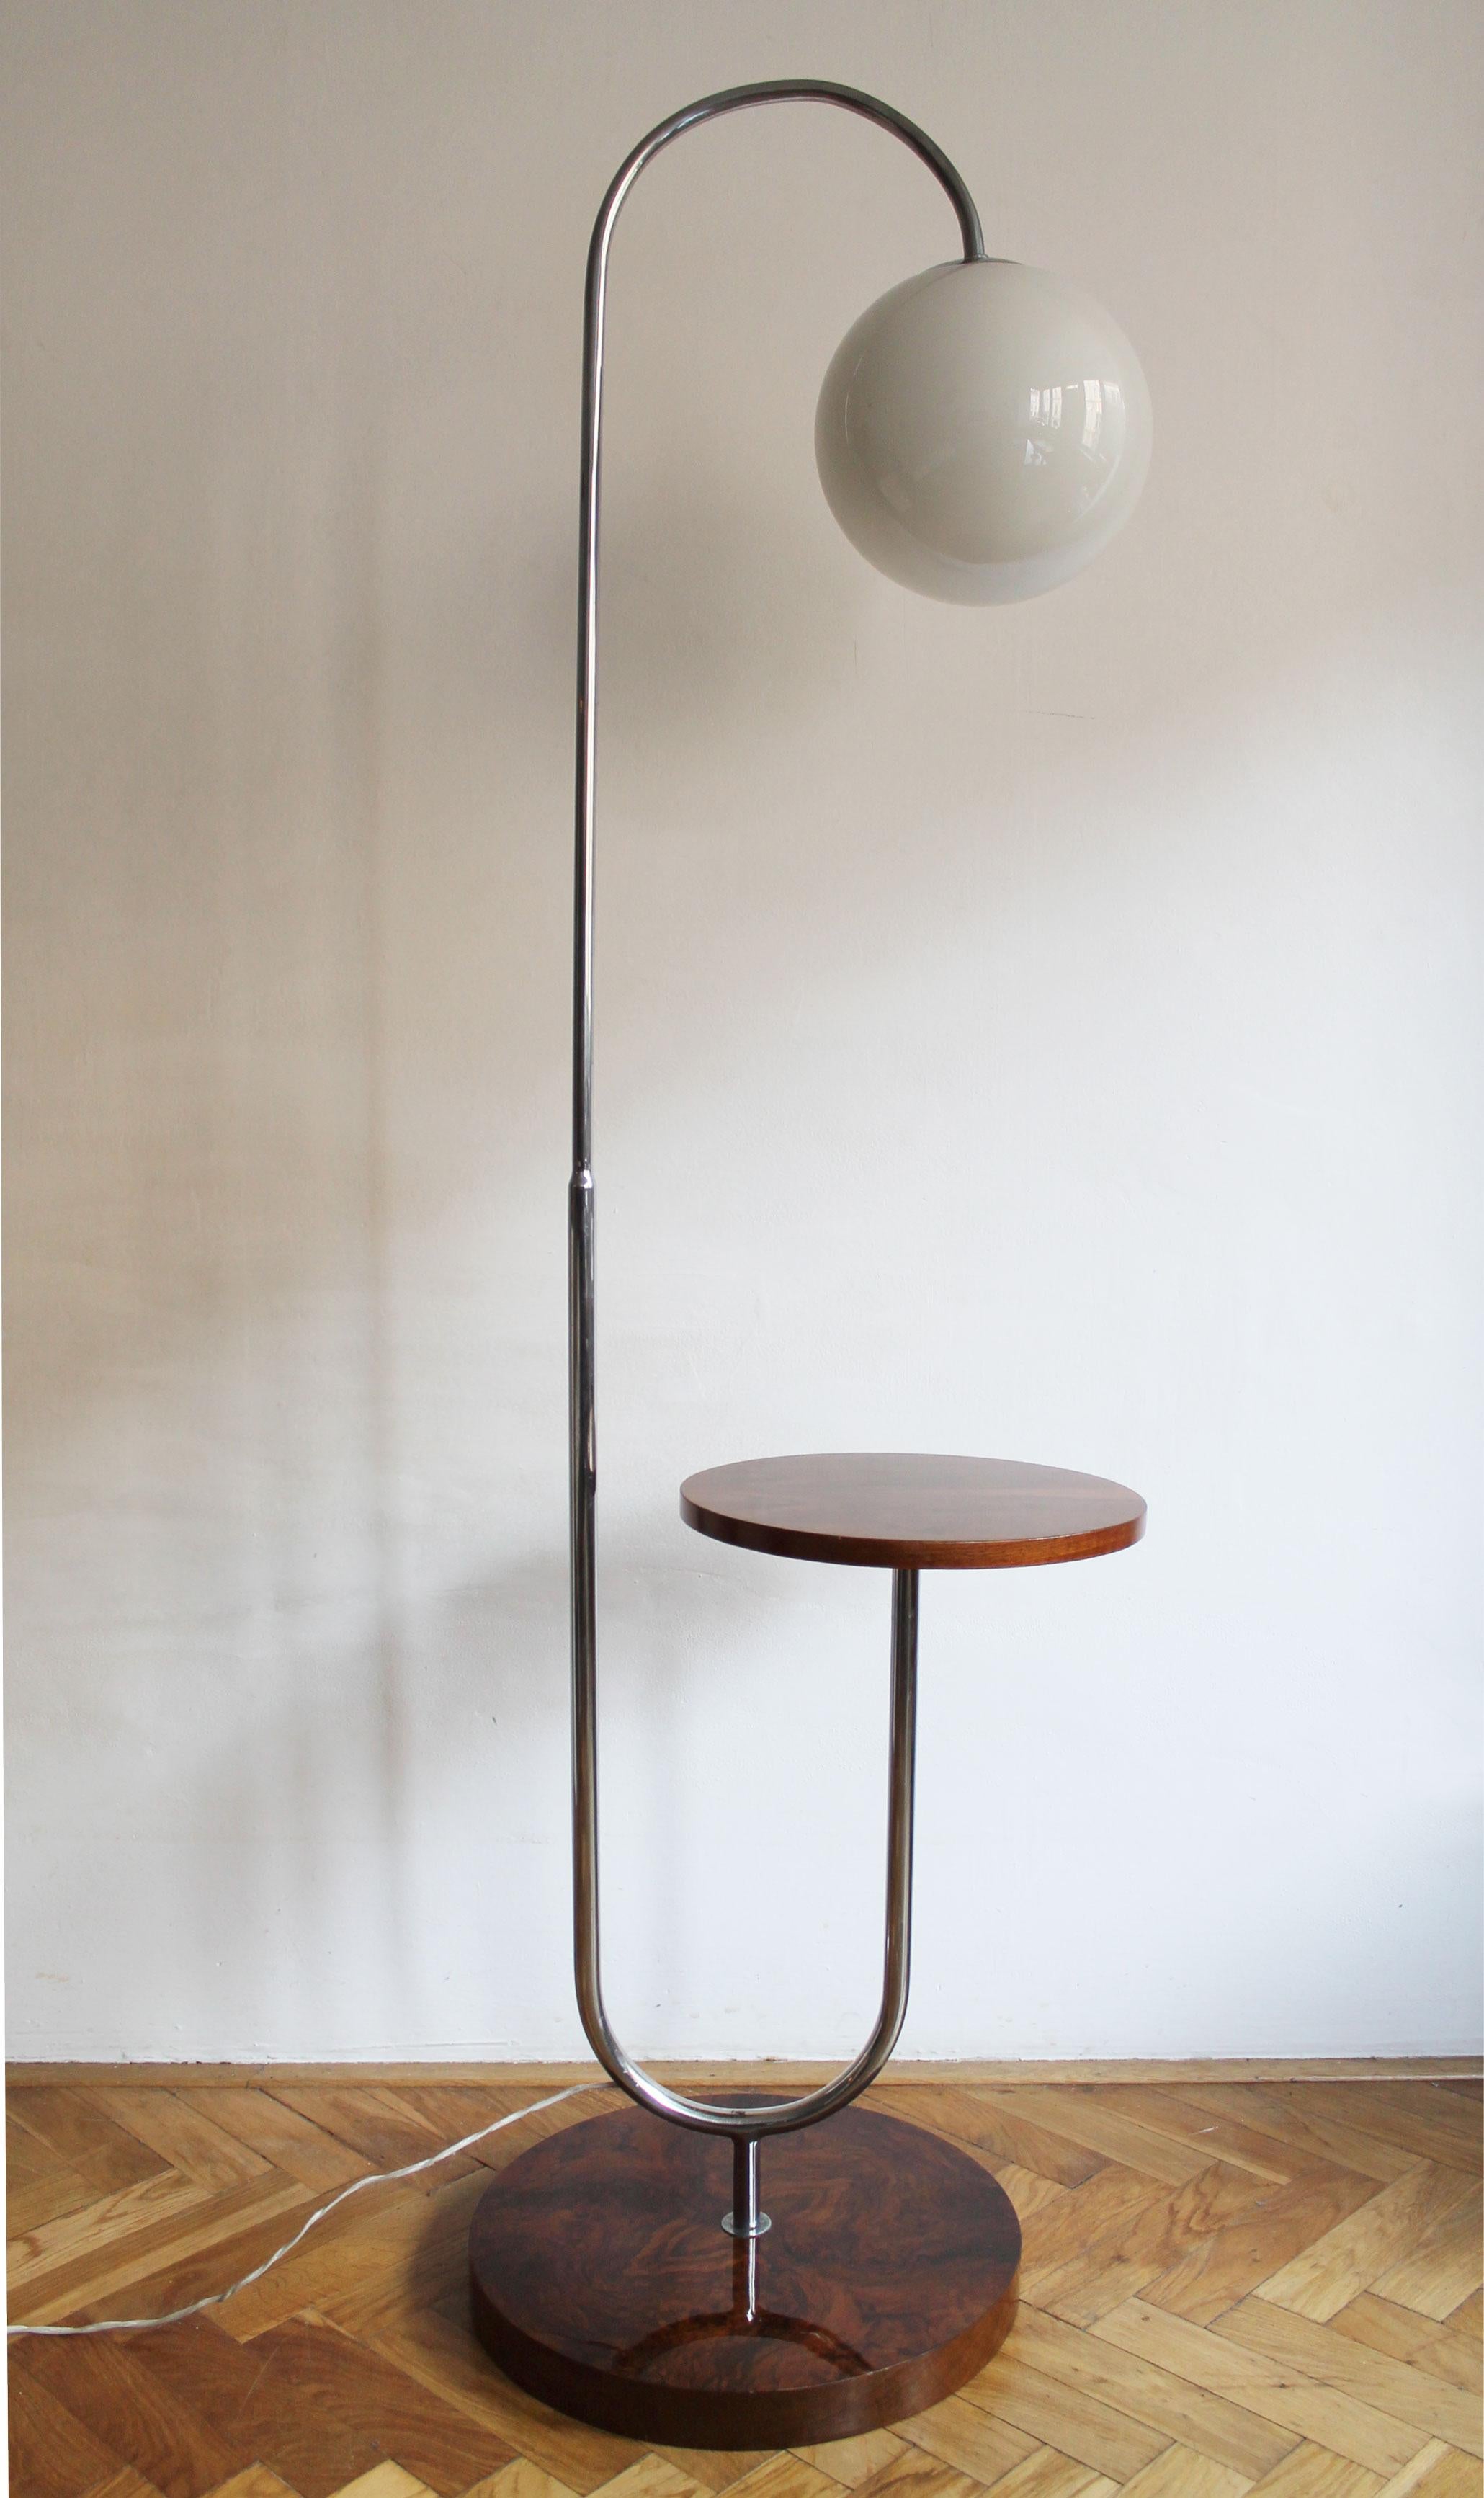 1930s Bauhaus Floor Lamp In Good Condition For Sale In Brno, CZ